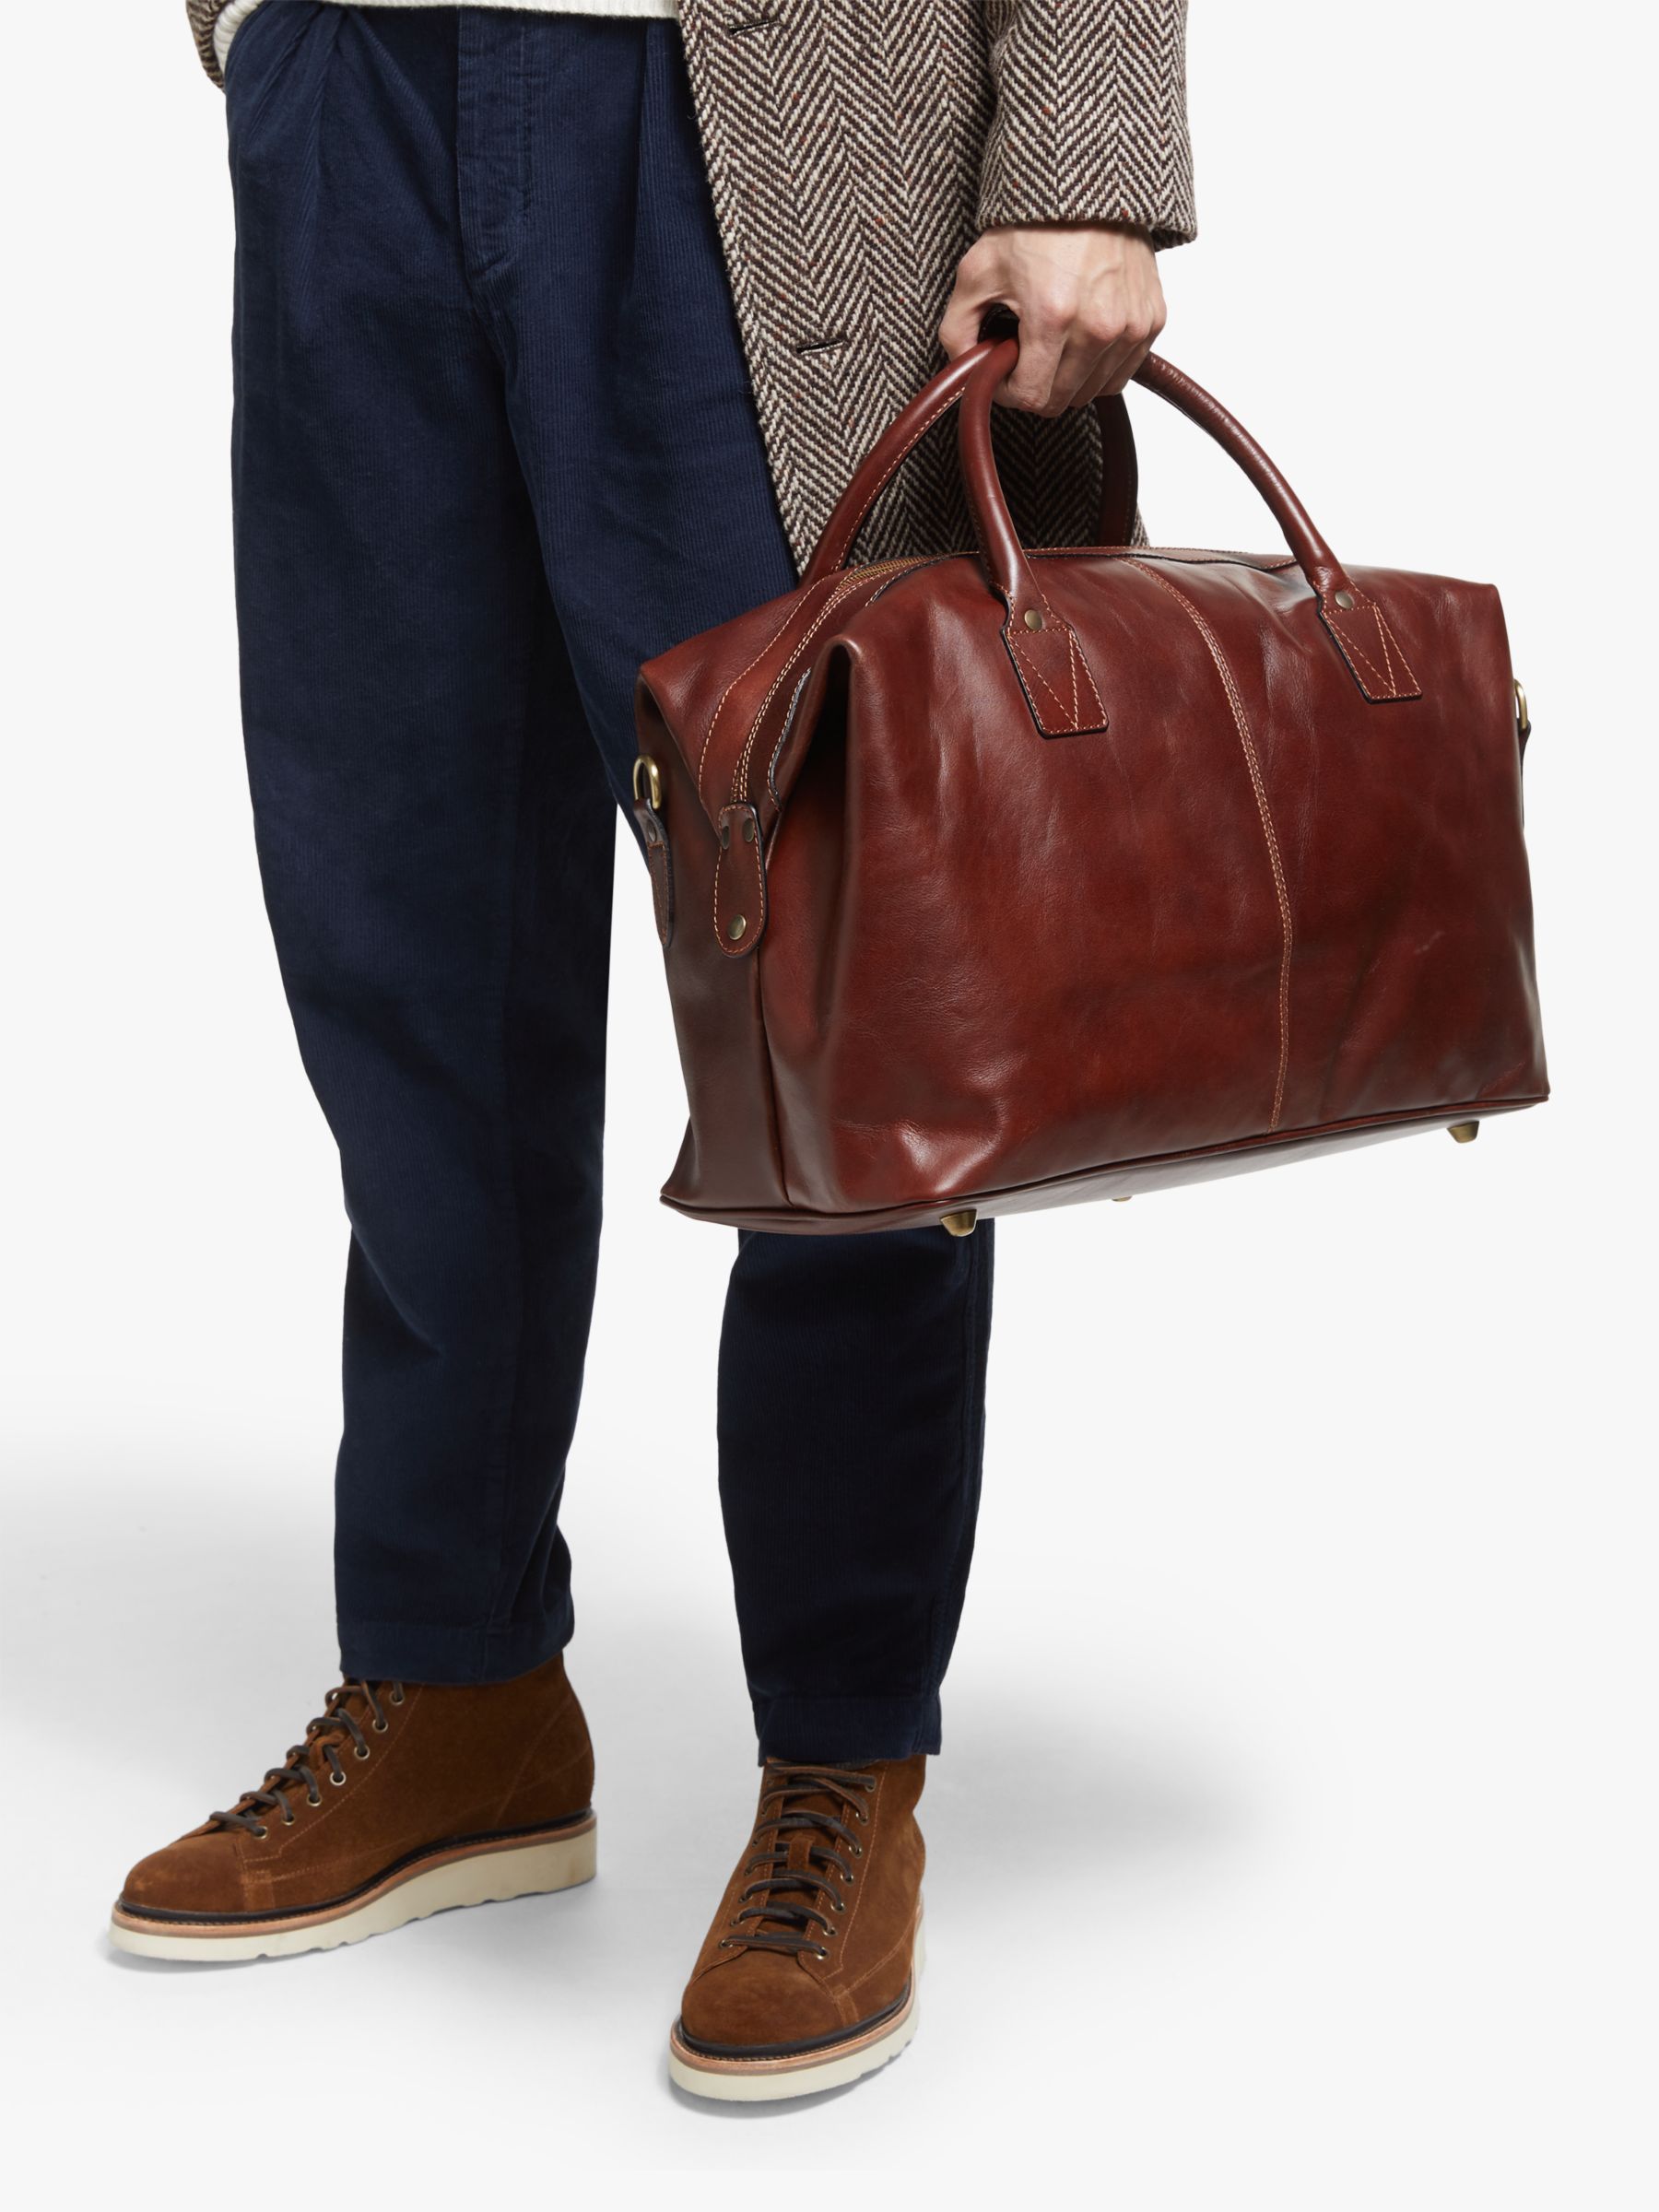 Buy John Lewis Made in Italy Leather Holdall Online at johnlewis.com